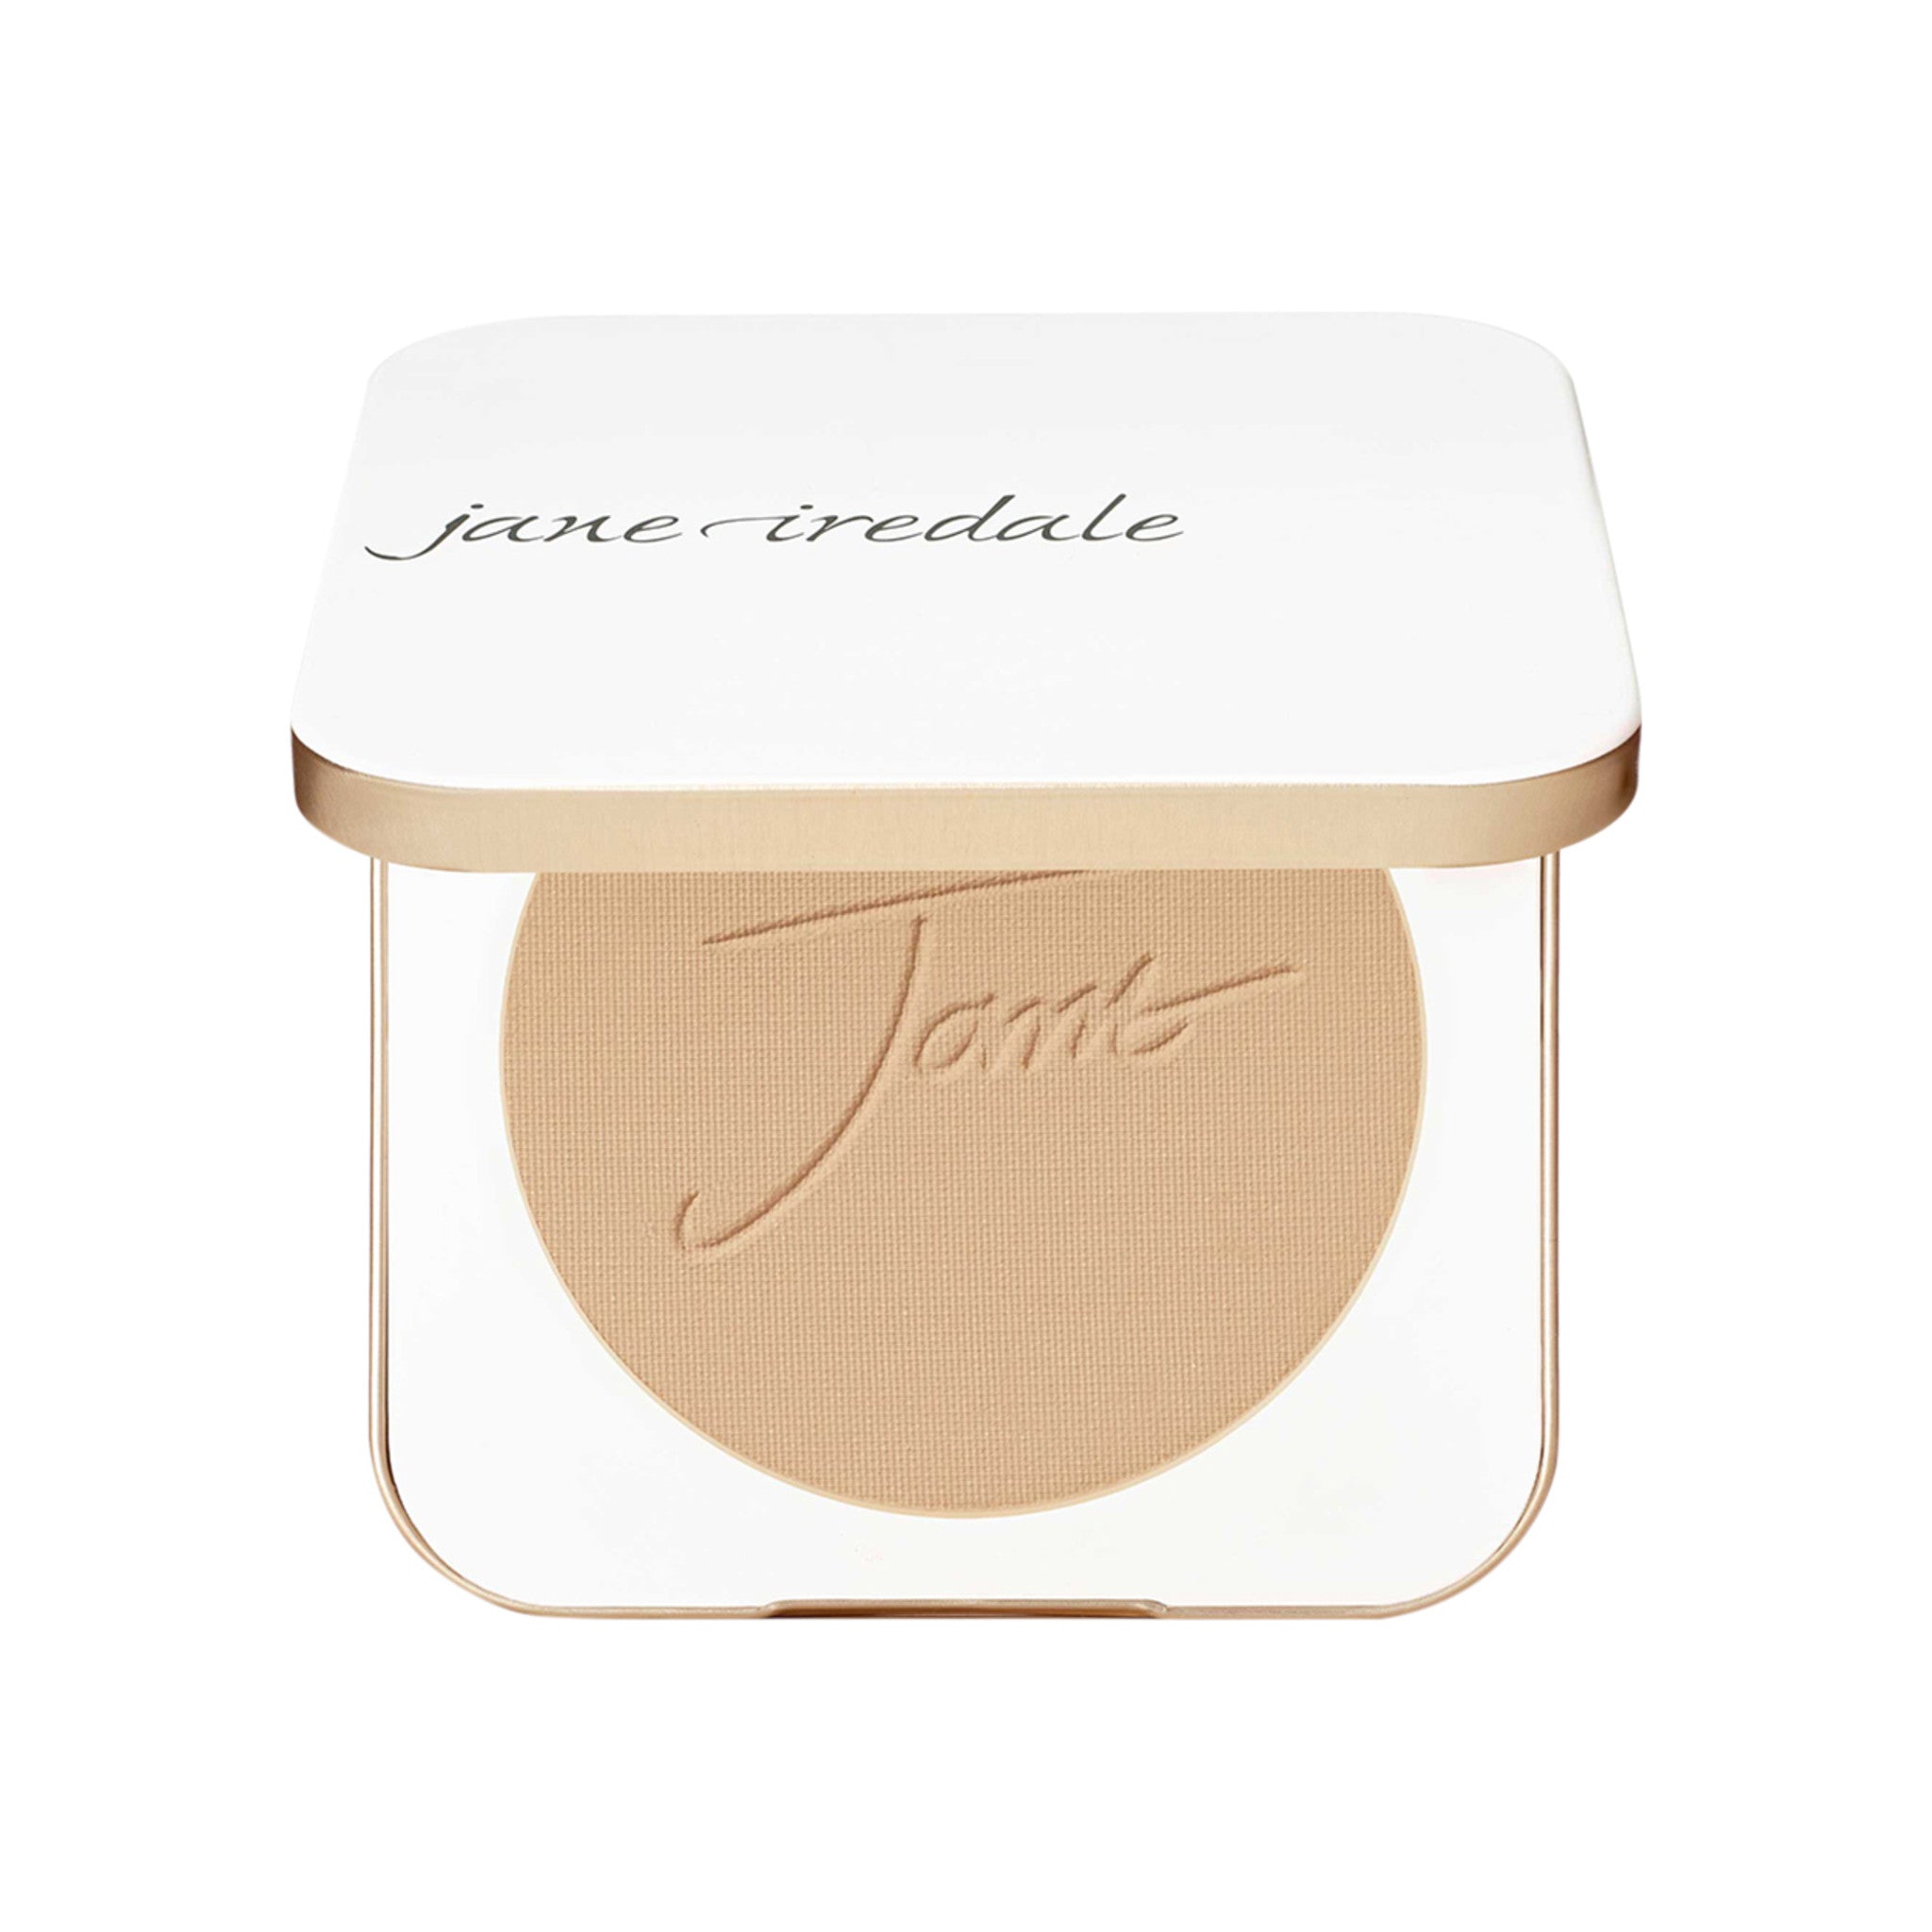 Jane Iredale PurePressed Base Mineral Foundation Refill Color/Shade variant: Golden Glow main image. This product is for medium warm complexions